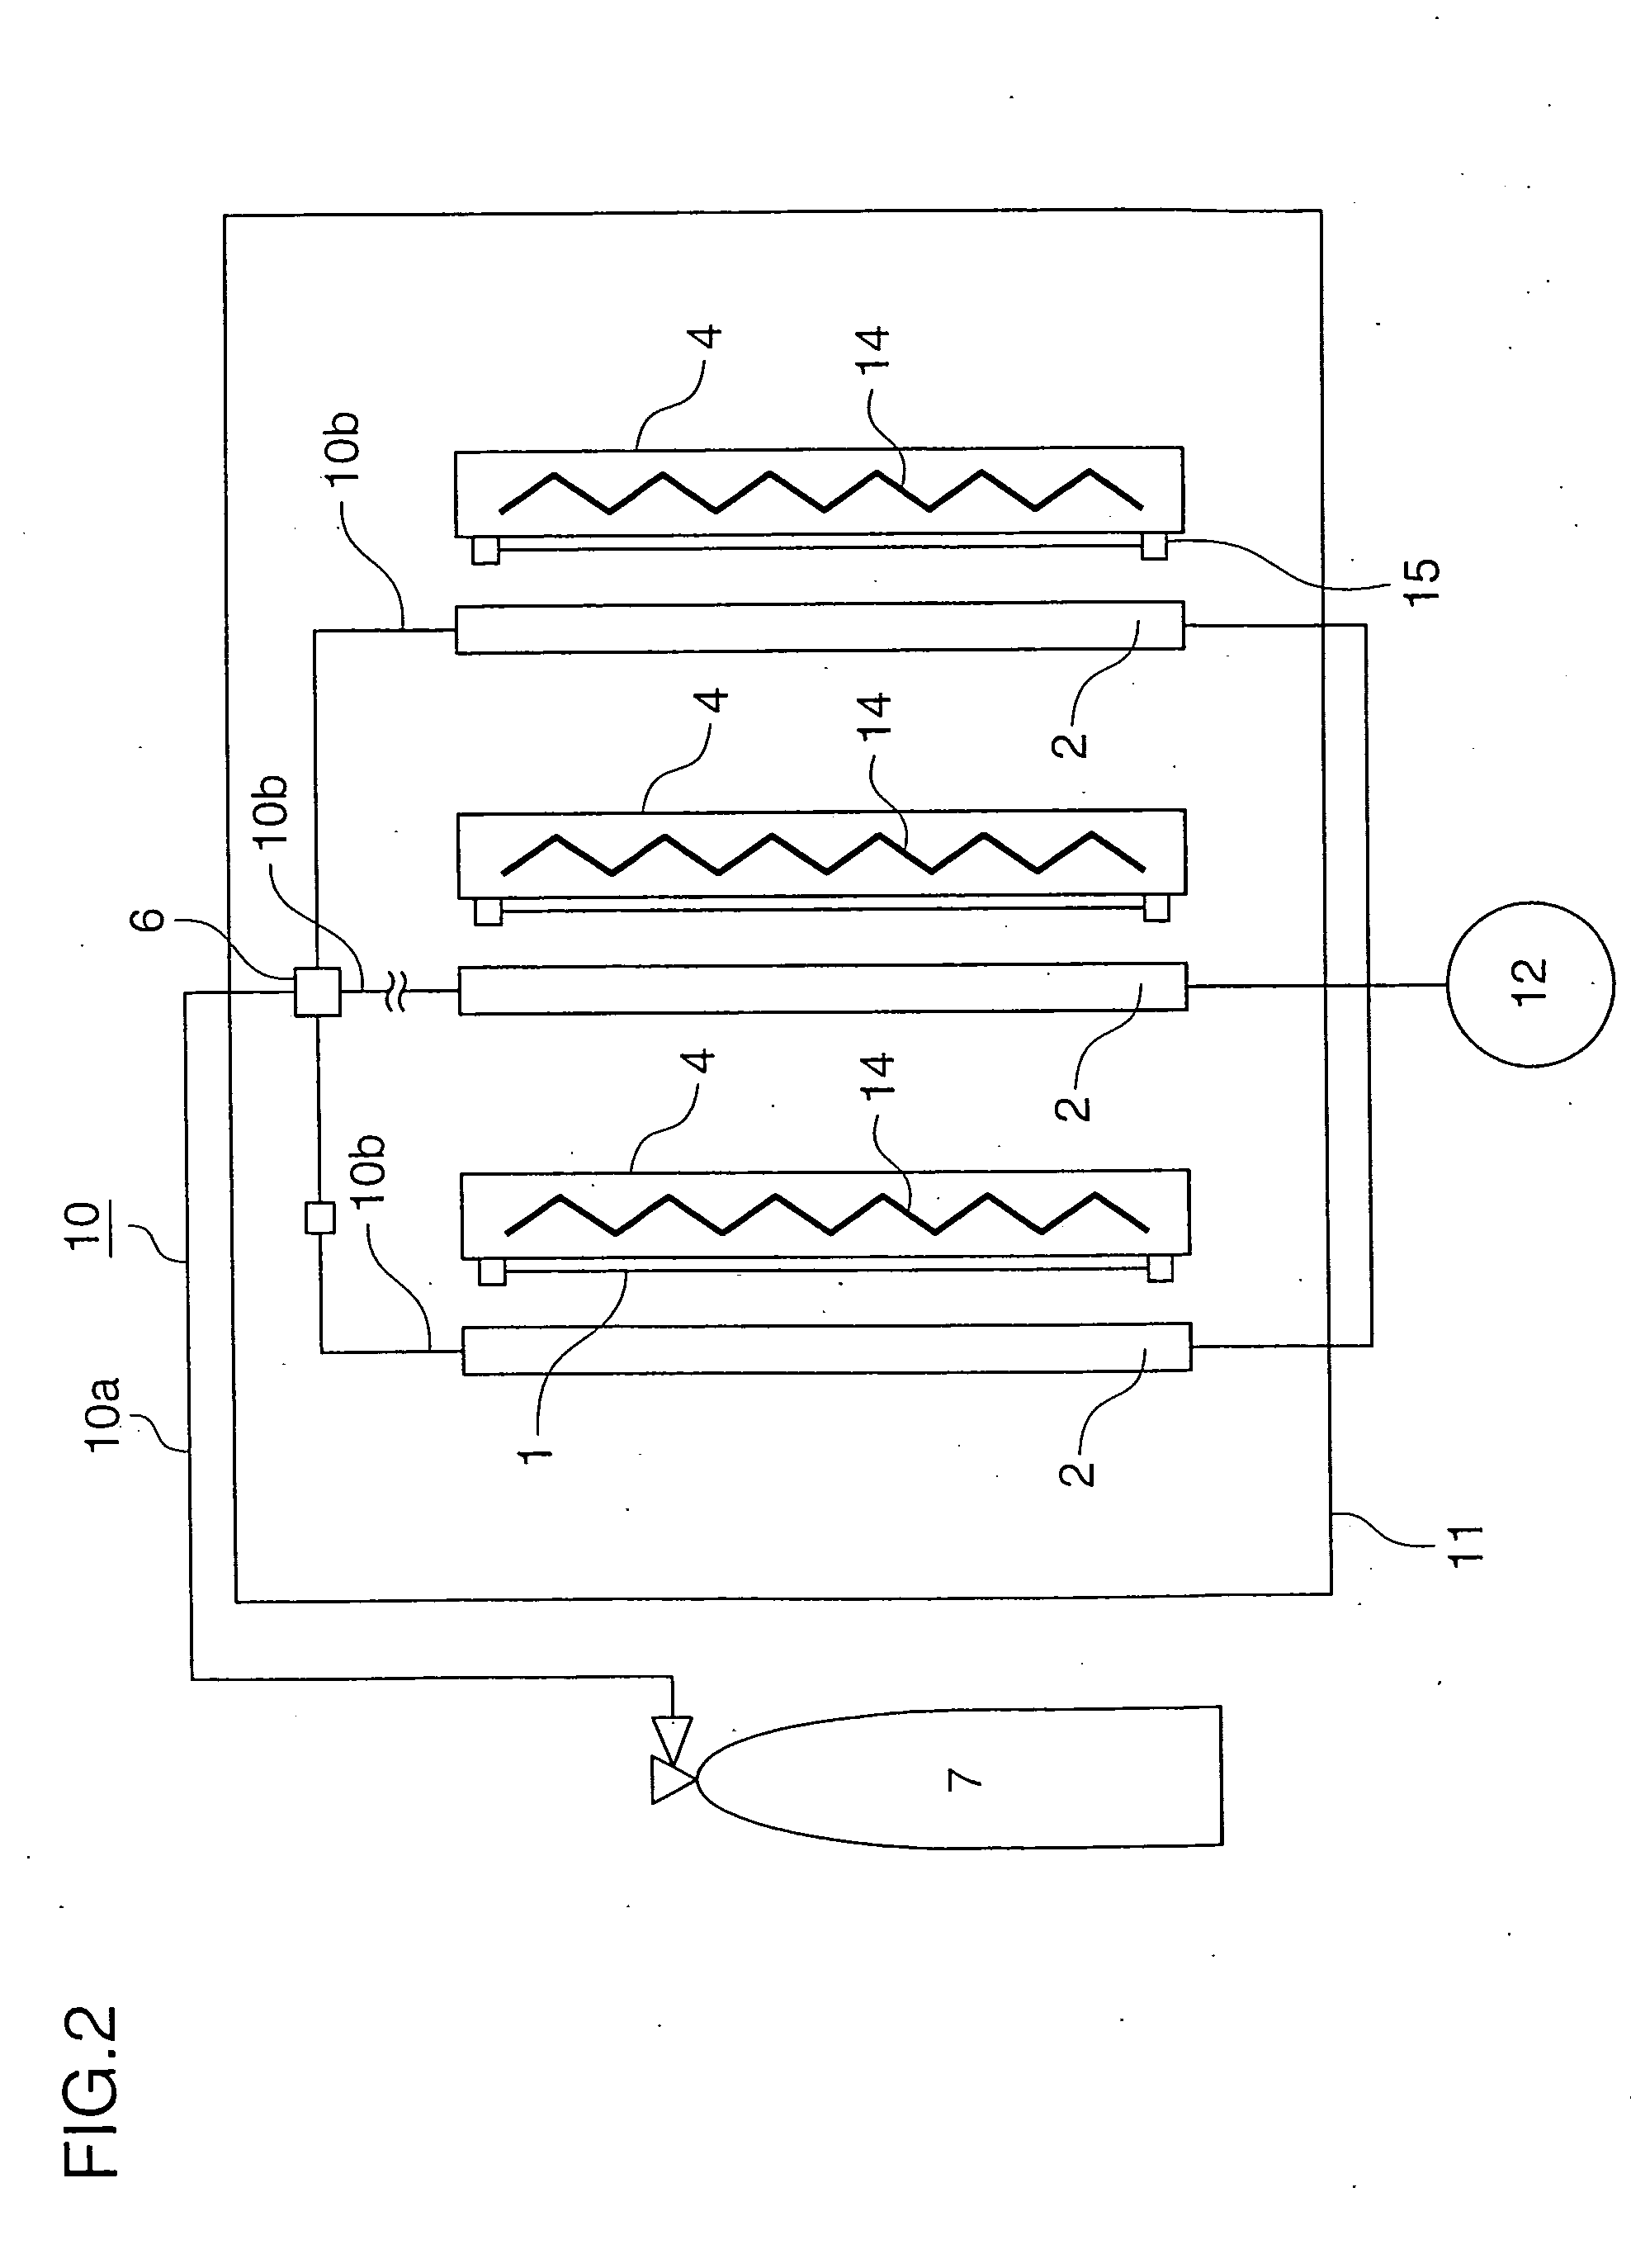 Plasma processing apparatus and semiconductor device manufactured by the same apparatus